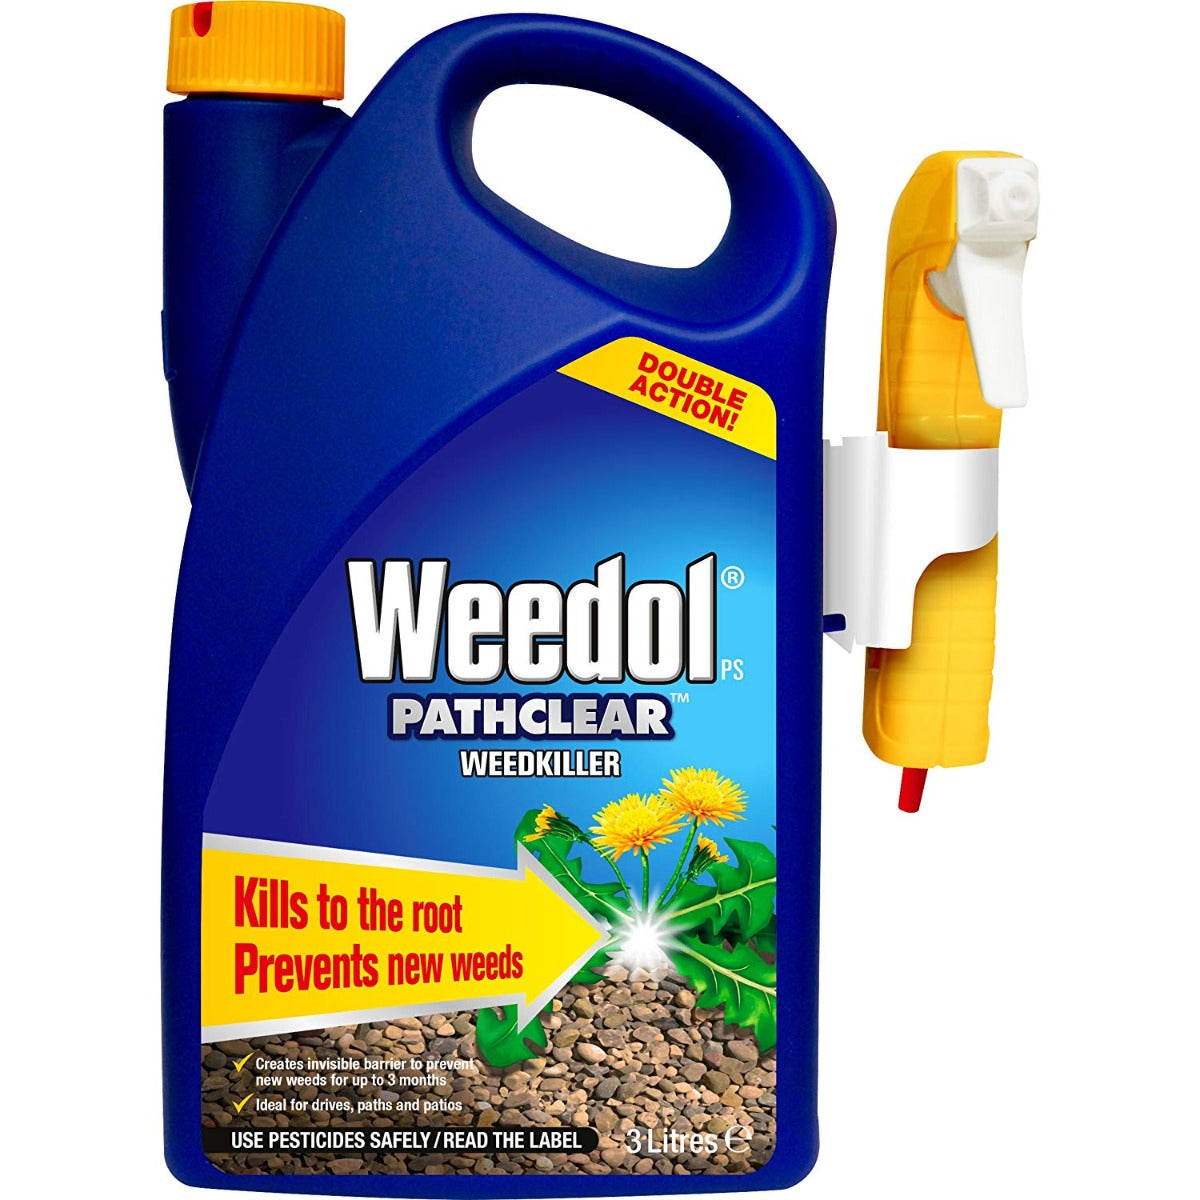 Weedol PS Pathclear Weedkiller Spray 3L